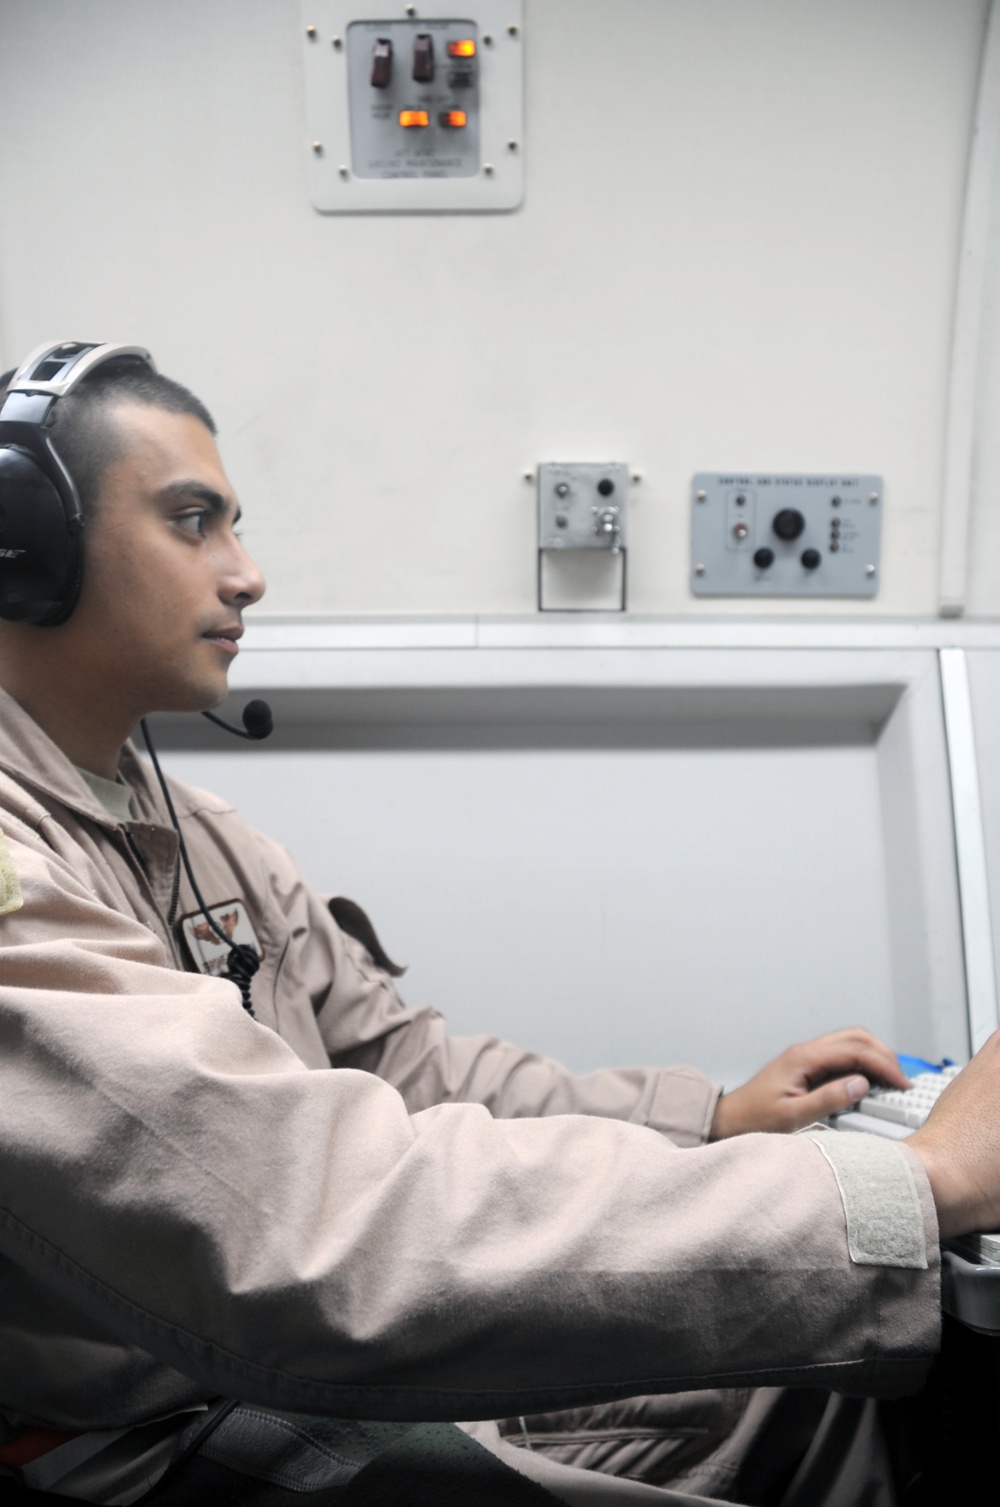 Tinker Senior Airman, Indianapolis Native, Maintains Radar Ops on AWACS Combat Air Missions in Southwest Asia